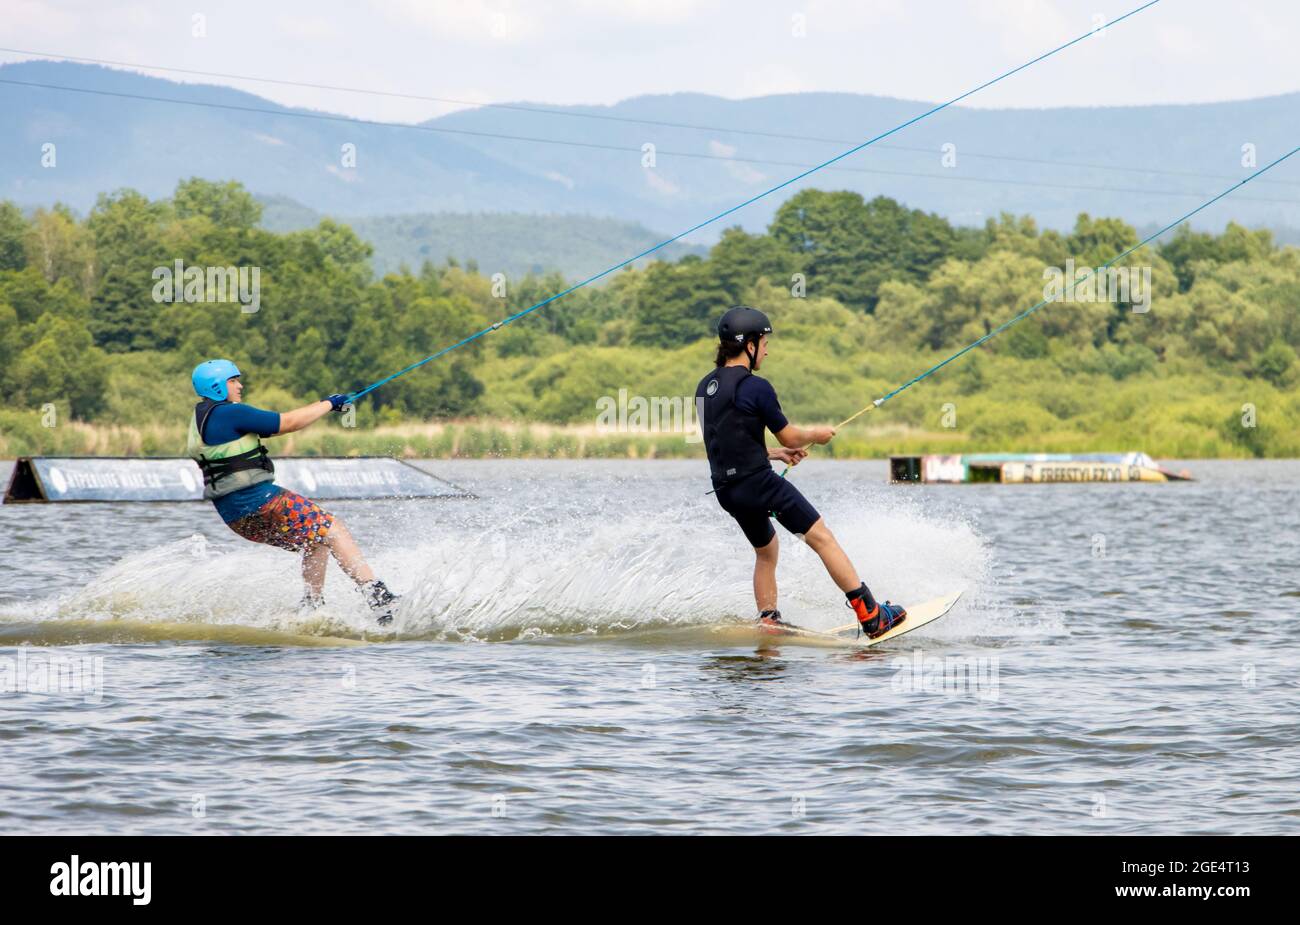 STRAZ p.R., CZECH REPUBLIC, JULY 13 2021, A young mens ride on surfboard. A group of surfer is pulled on a water towage on the lake. Stock Photo